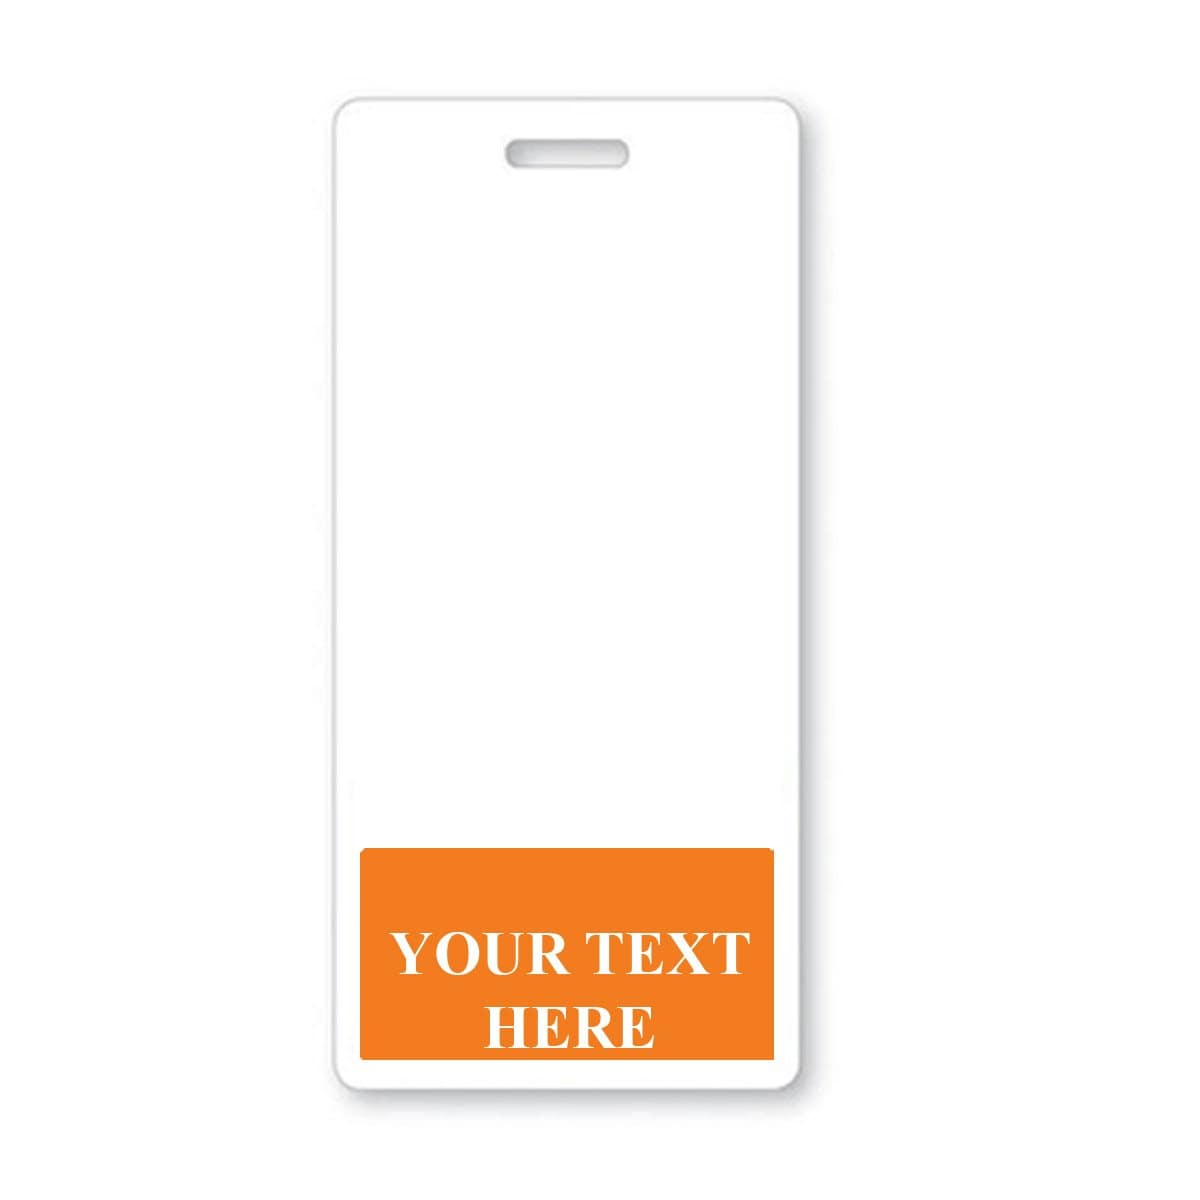 A white vertical identification badge with a slot for attachment at the top. The bottom features an orange section with the text "YOUR TEXT HERE" in white, making it perfect for Custom Printed Badge Buddy Vertical (Standard Size).